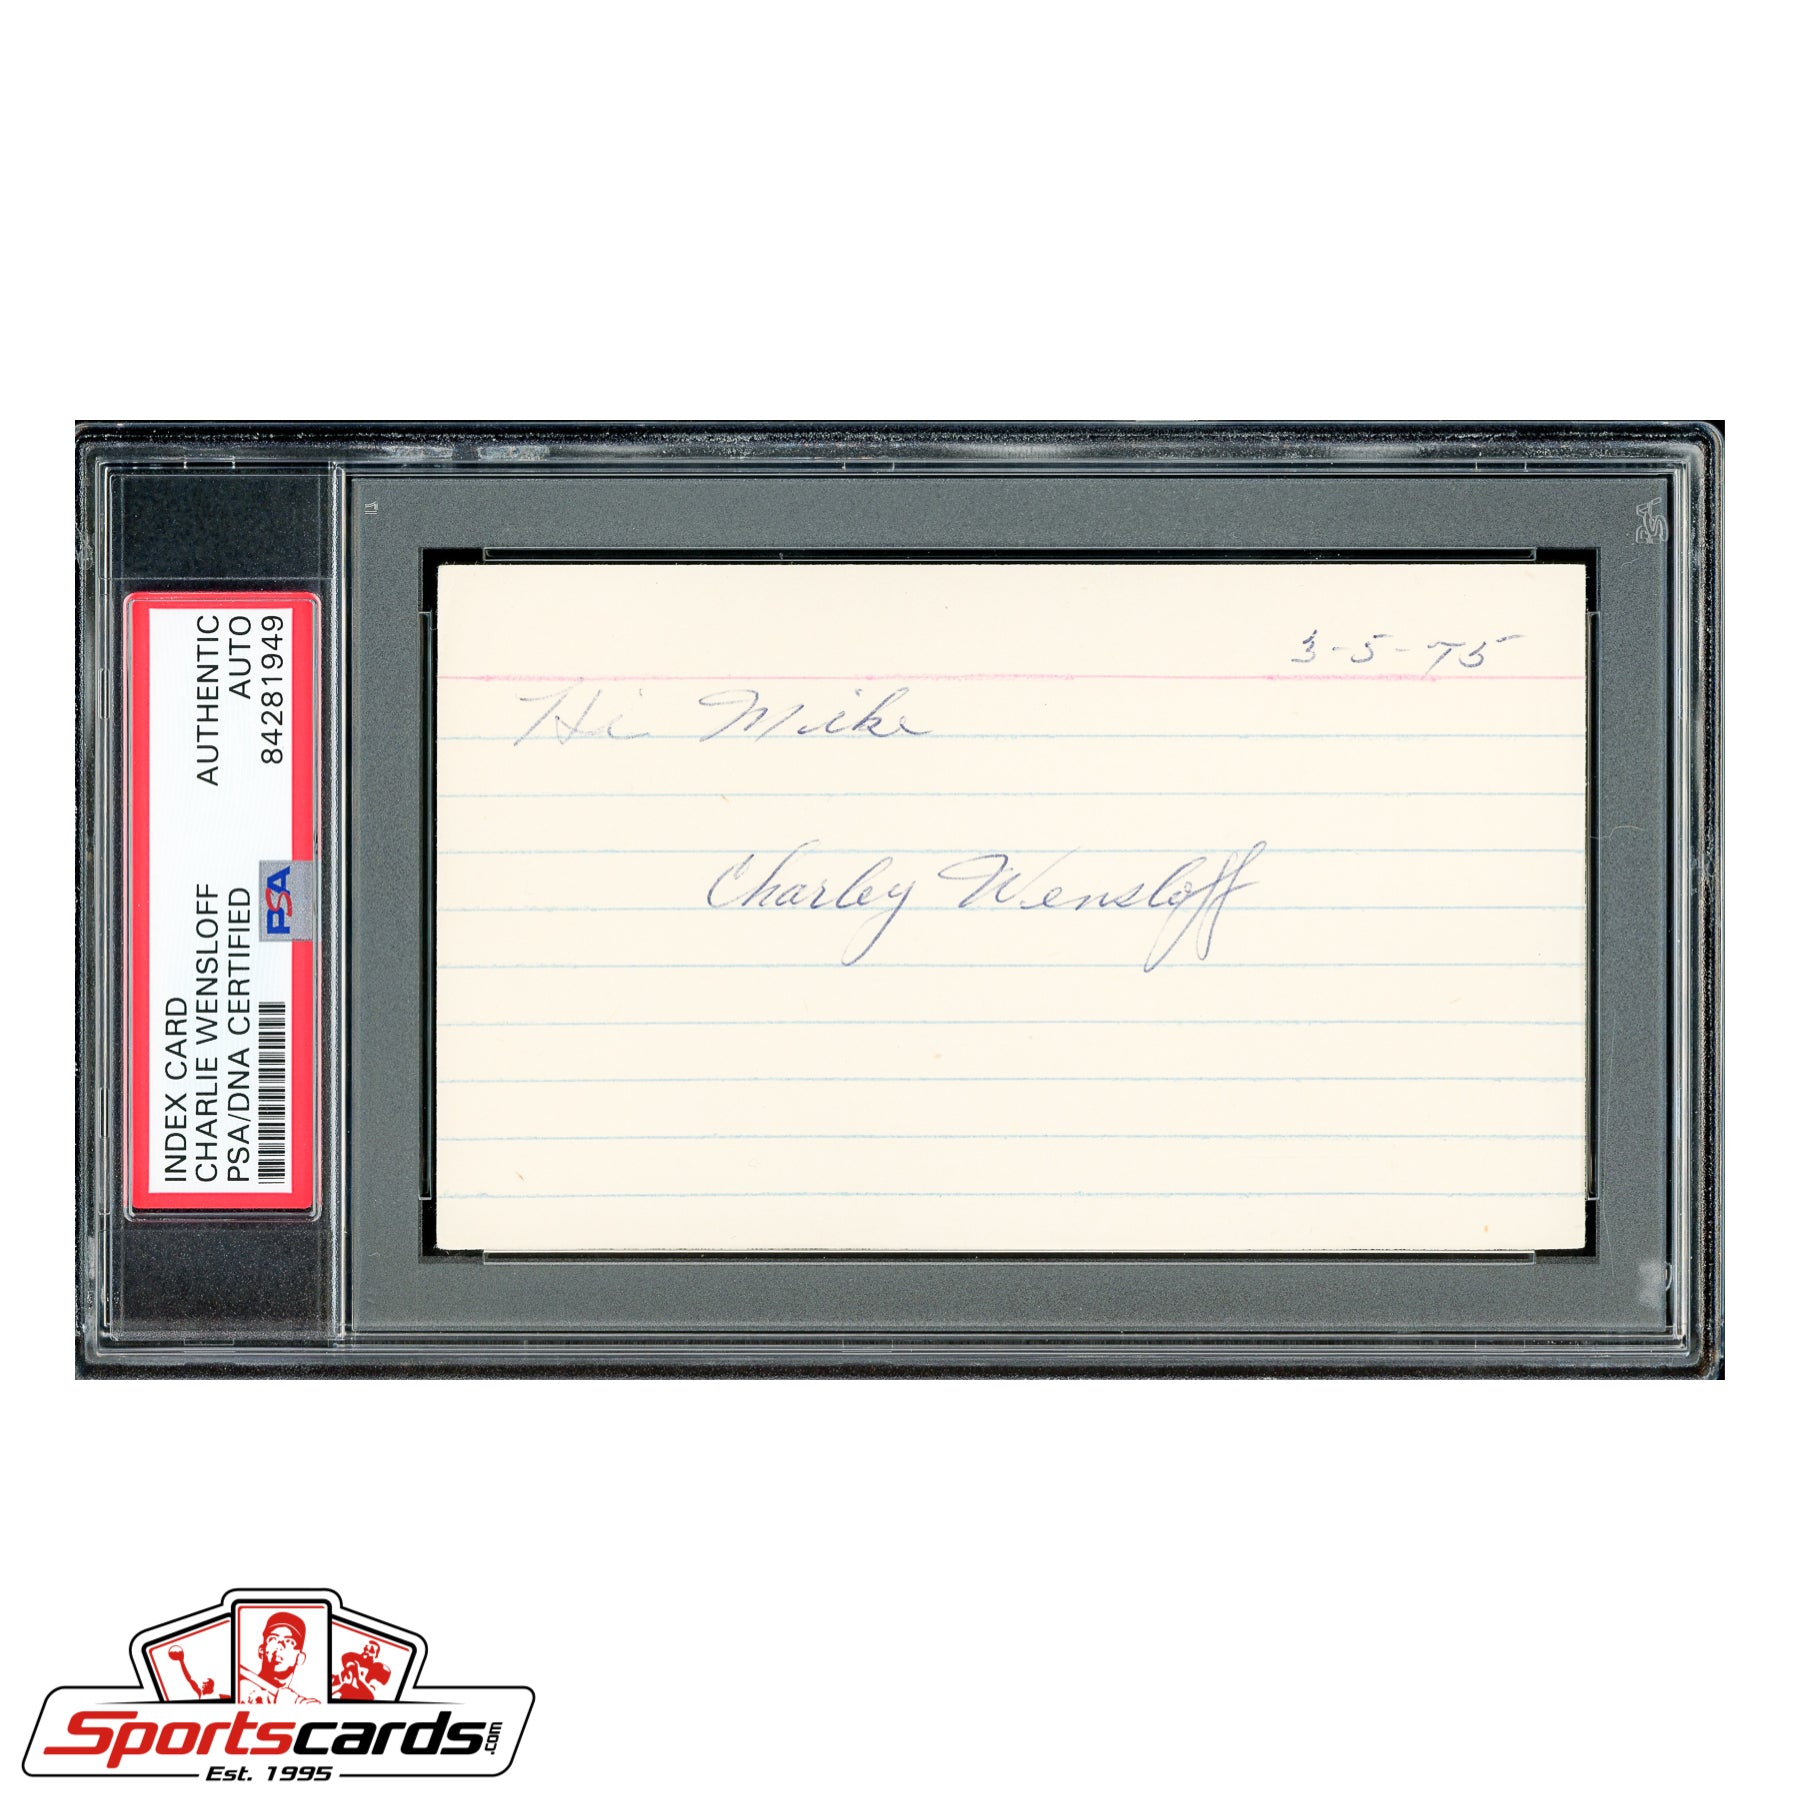 Charley Wensloff (1947 Yankees) Signed Auto 3x5 Index Card - PSA/DNA